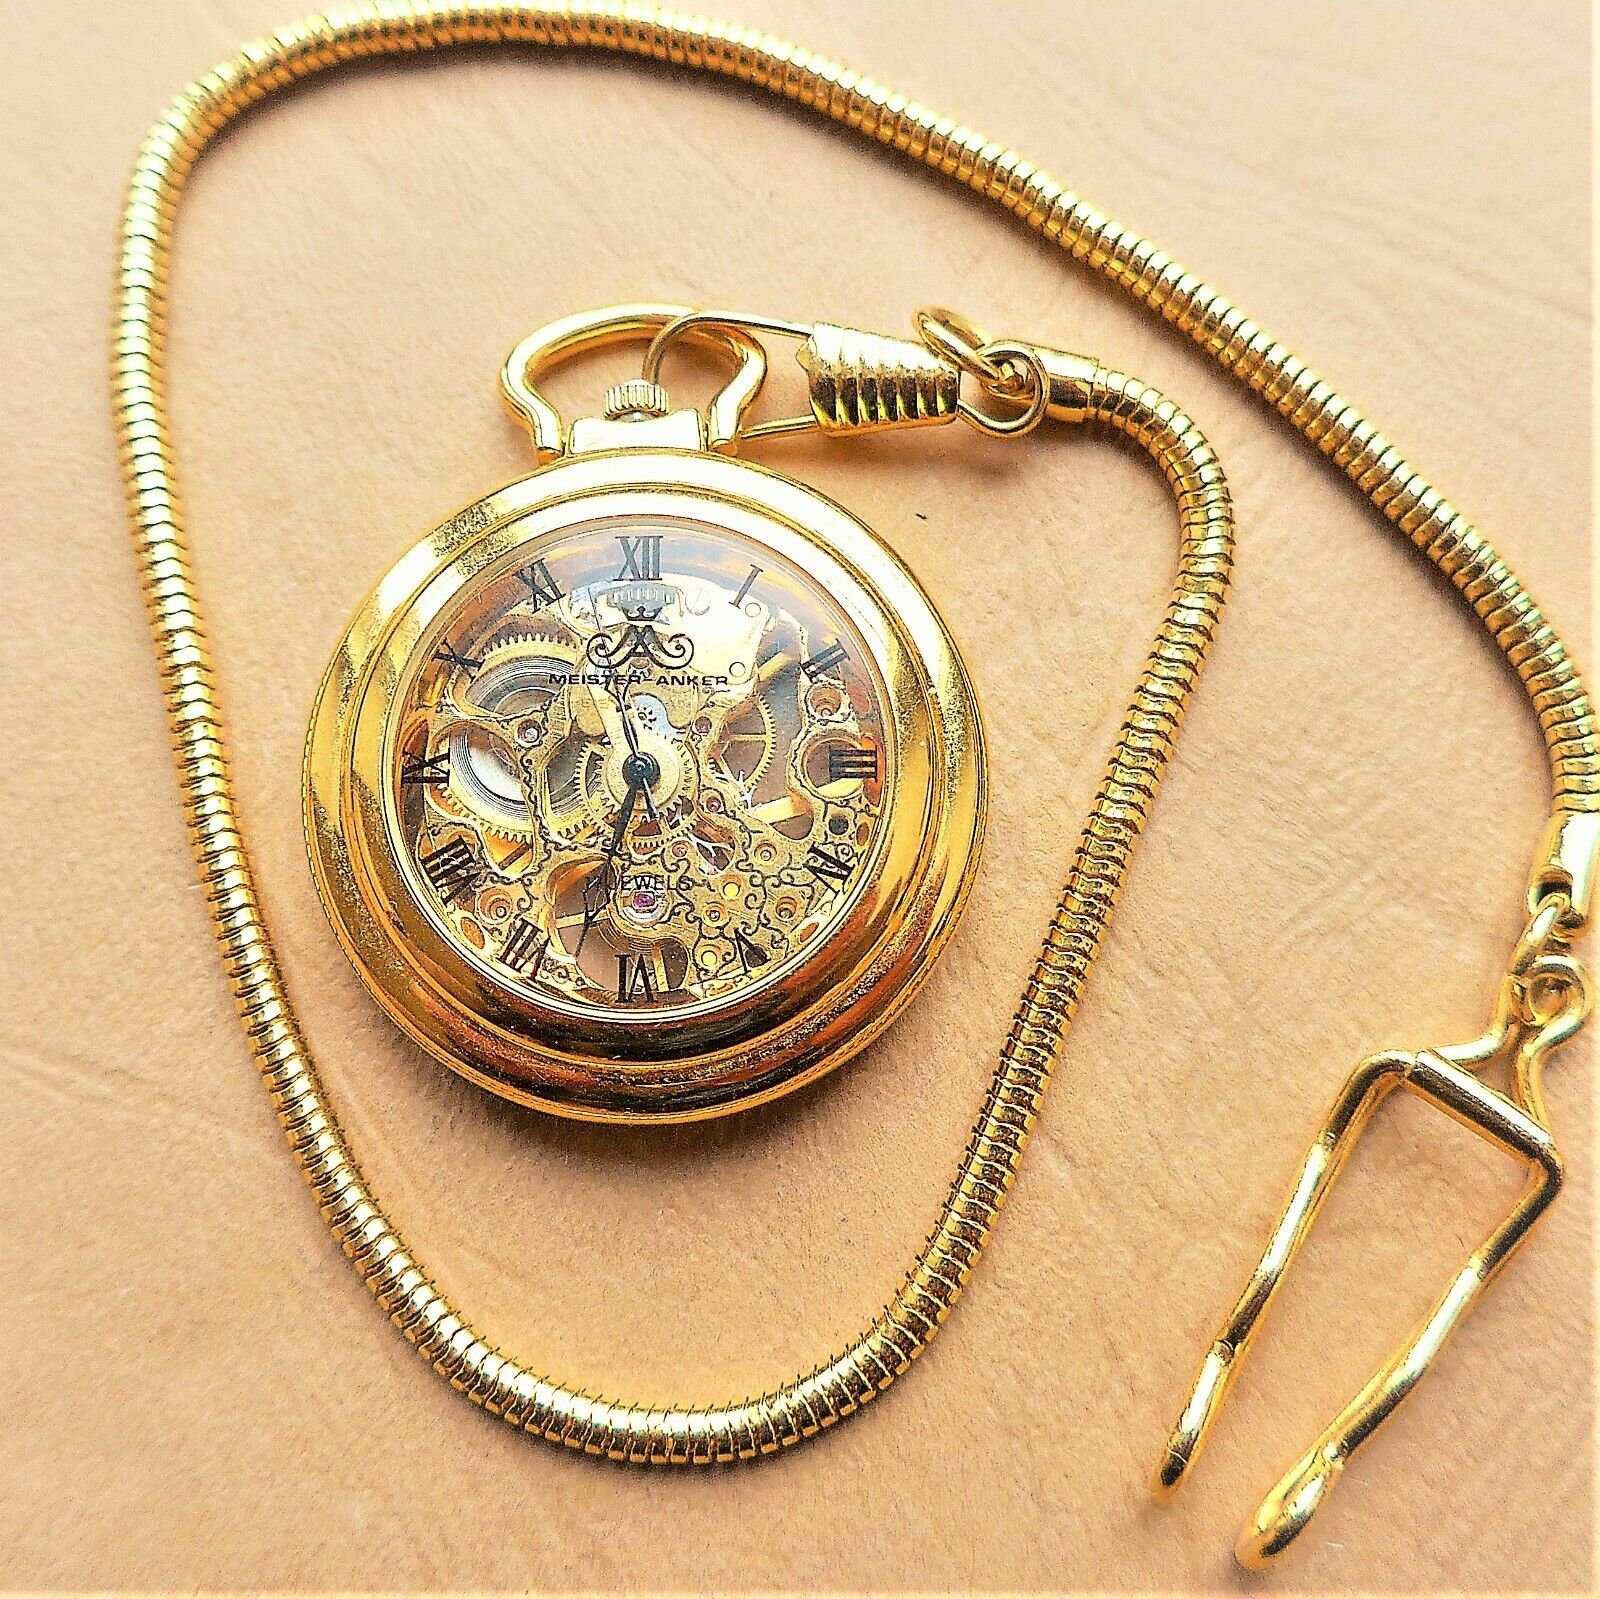 Dainty Meisteranker Skeleton - Pocket Watch, Gold Plated, Chain, Good Function